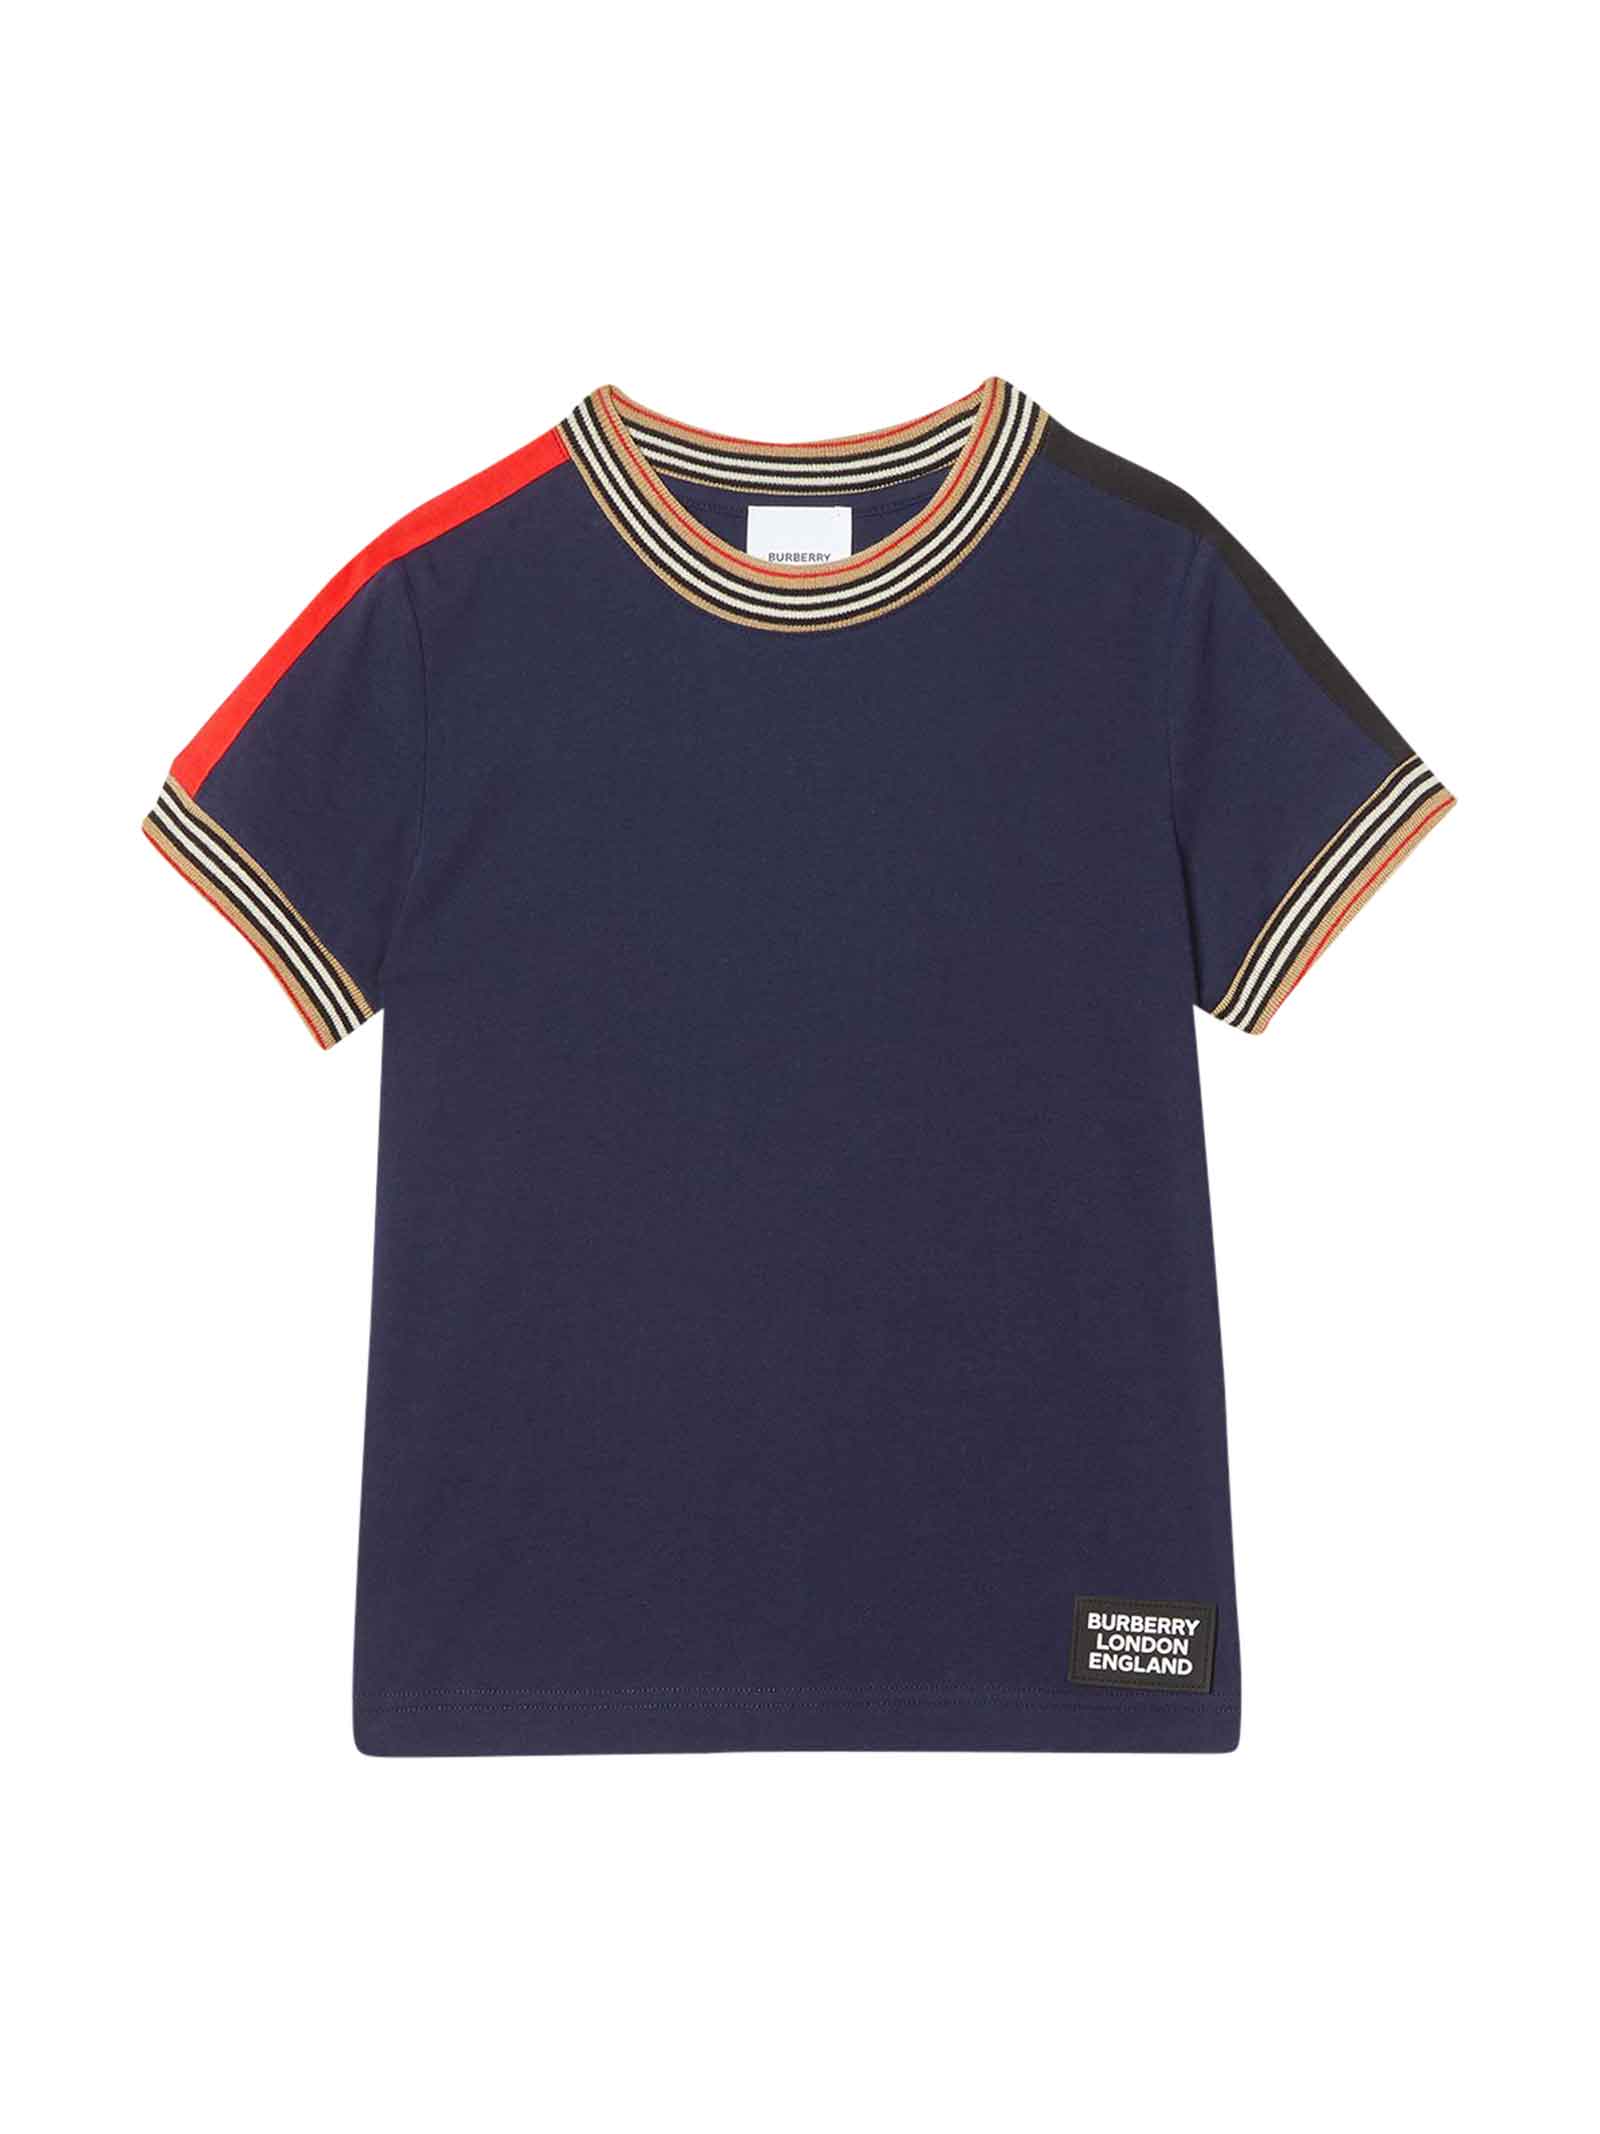 Burberry Kids' Blue T-shirt With Check Details